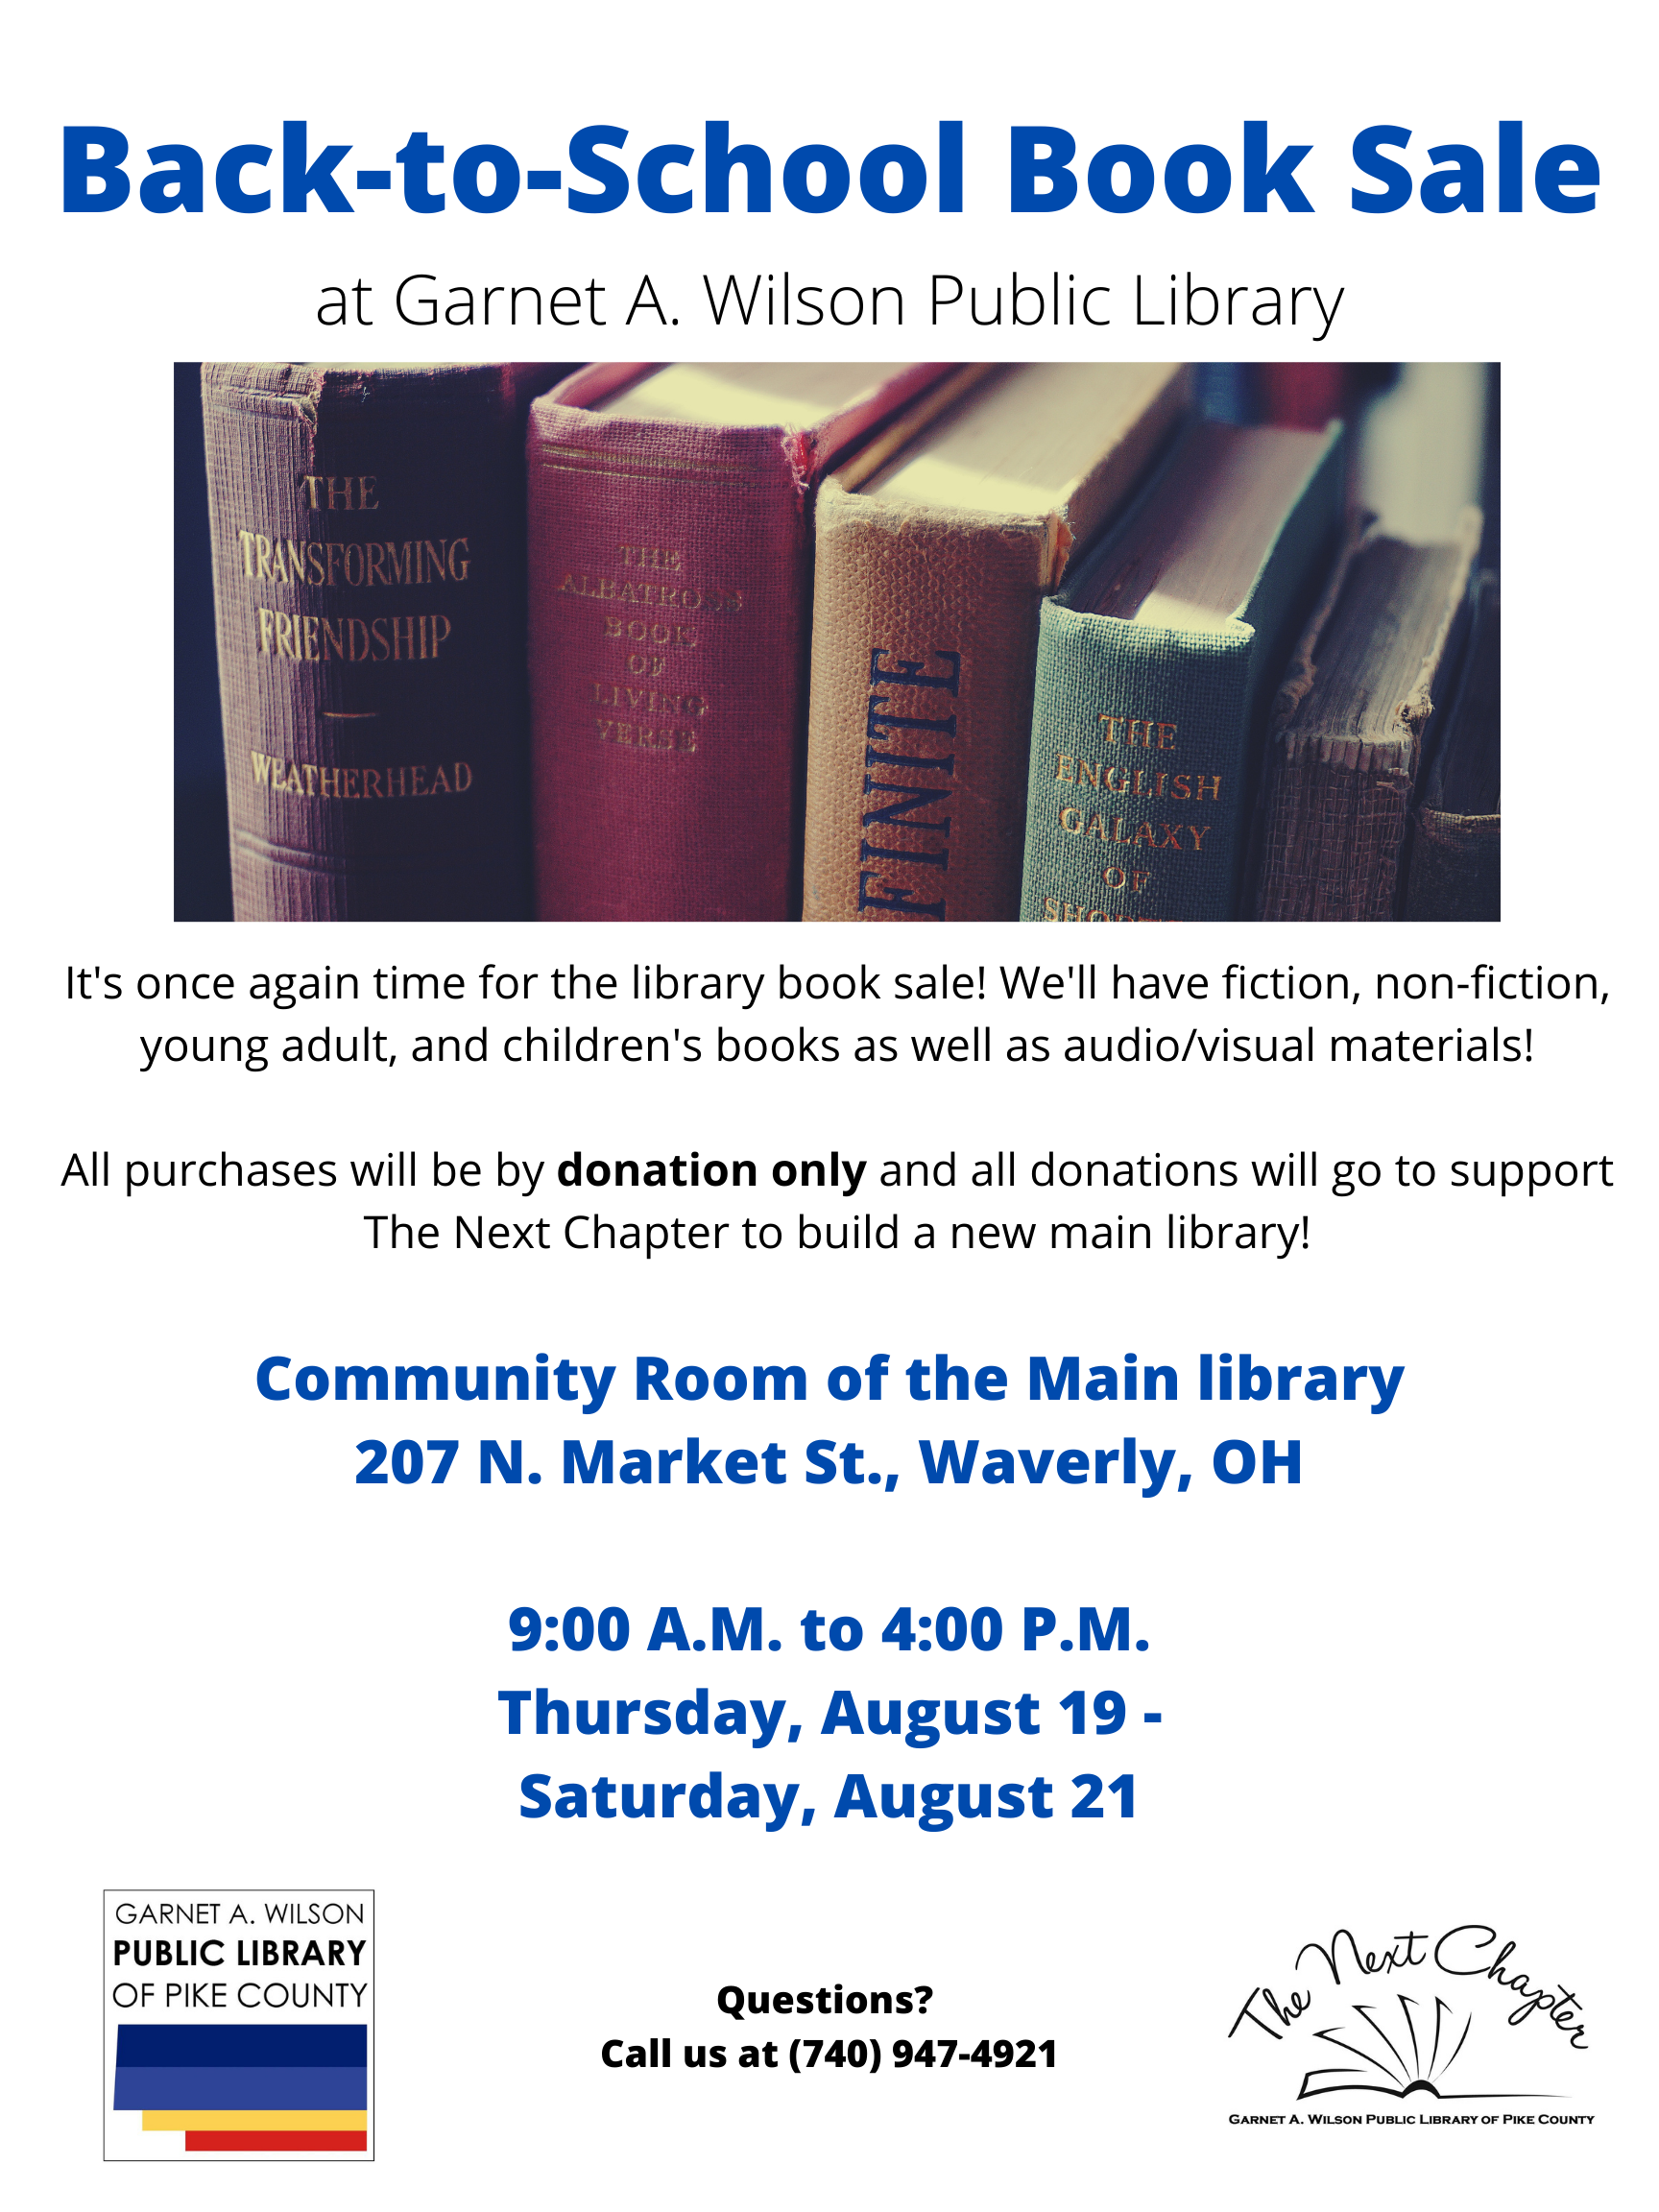 Flyer for book sale taking place Thursday-Saturday. August 19, 2021- August 21, 2021.